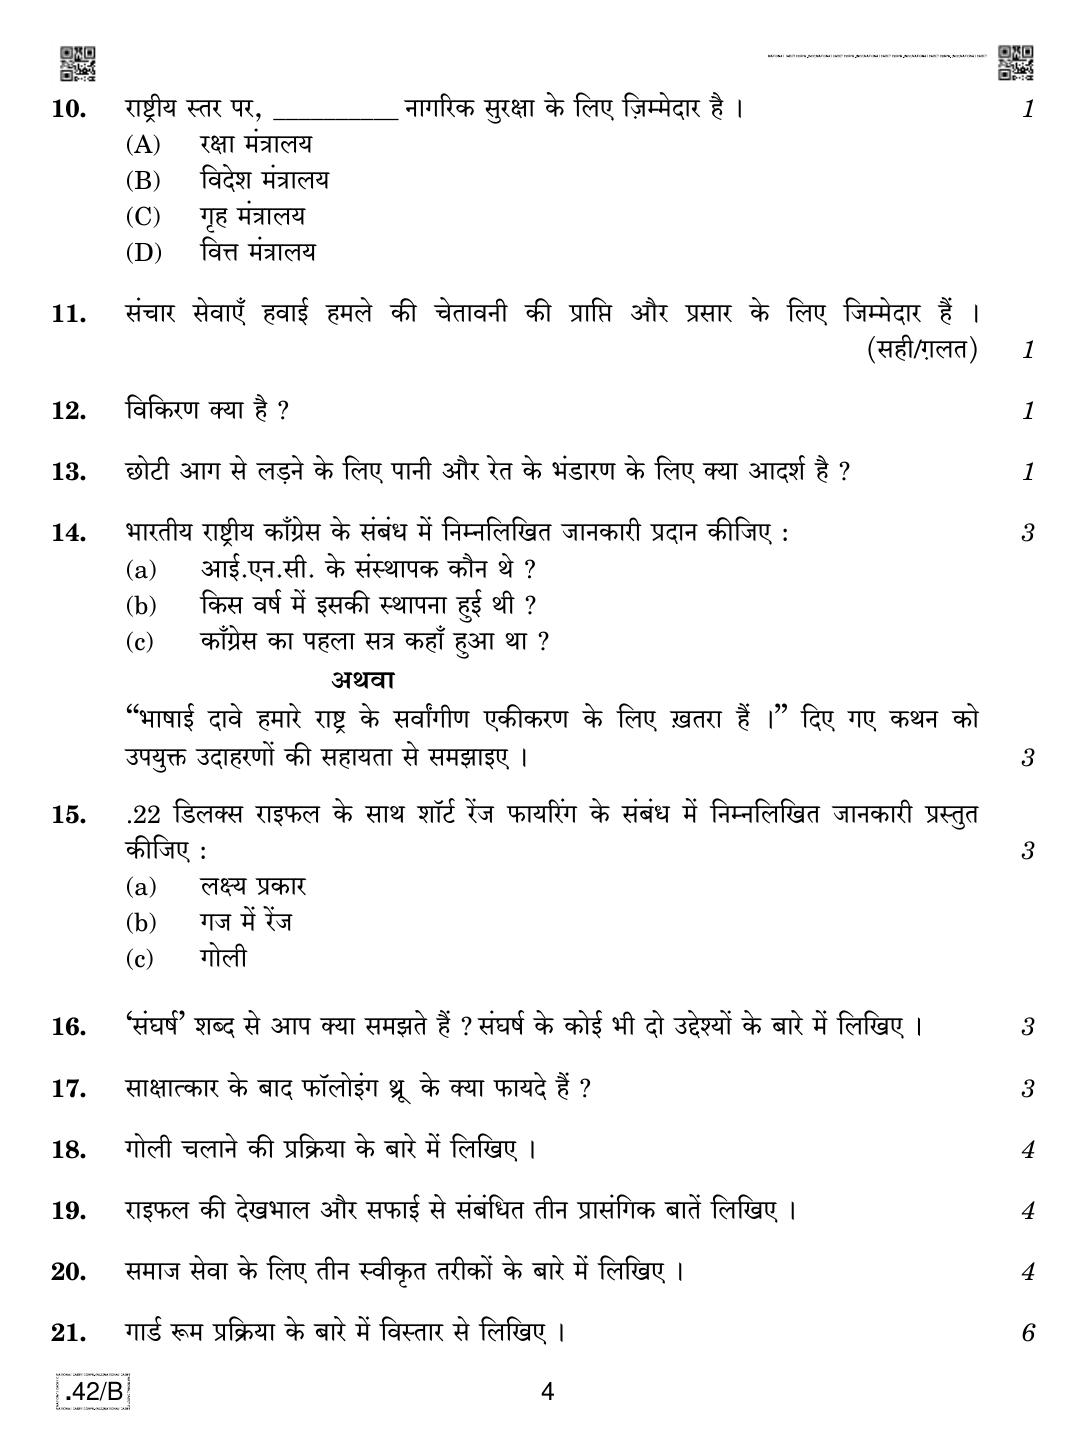 CBSE Class 12 NCC 2020 Compartment Question Paper - Page 4